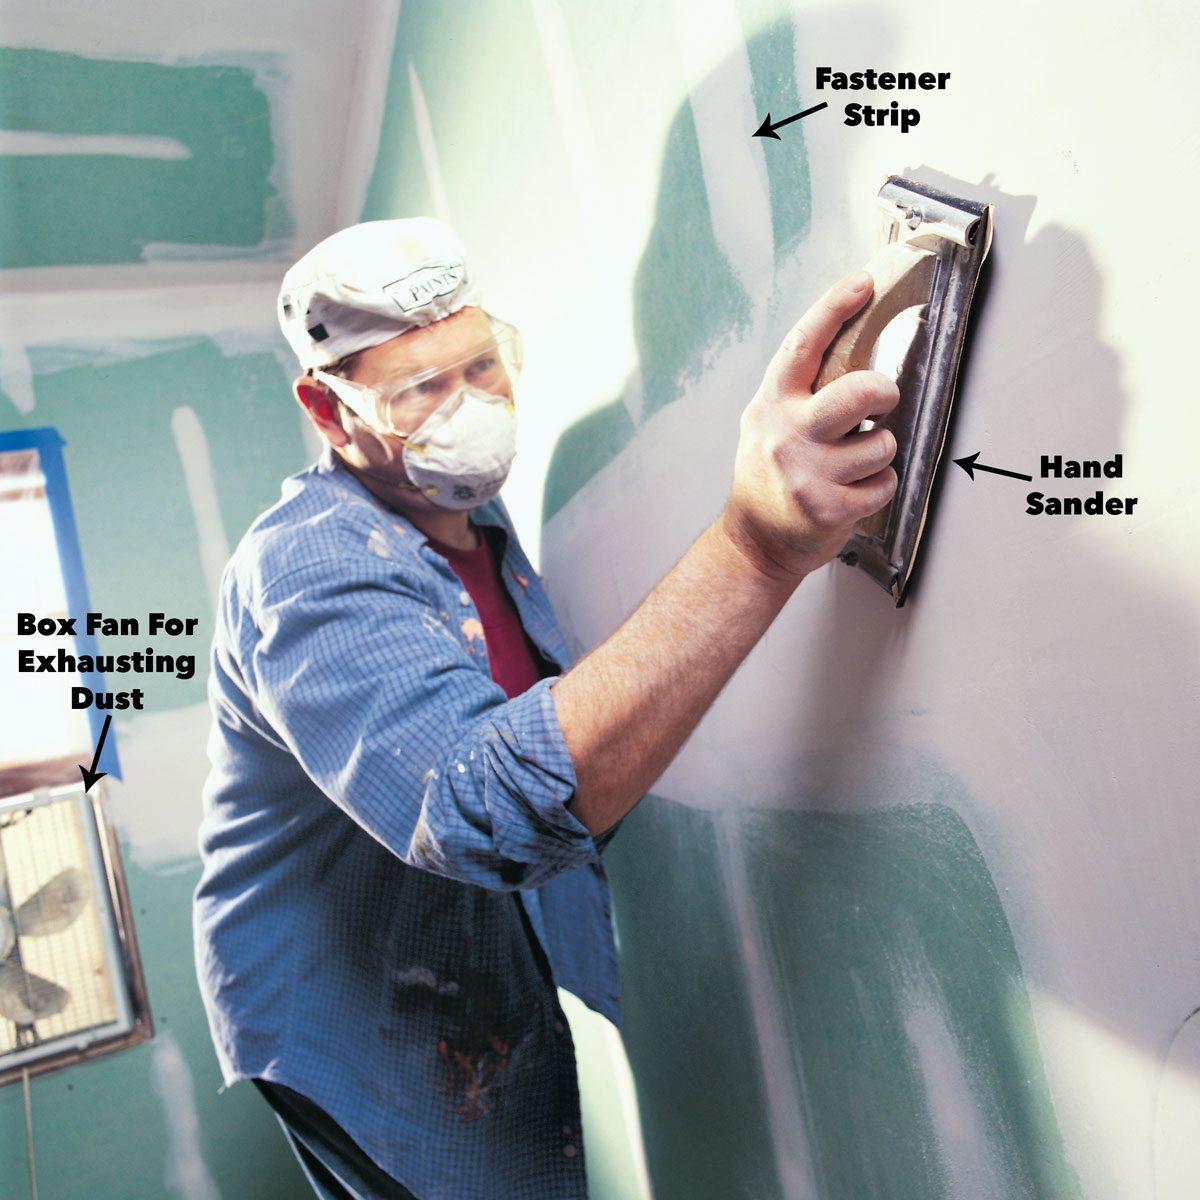 How to Wet-Sand Drywall to Avoid Dust